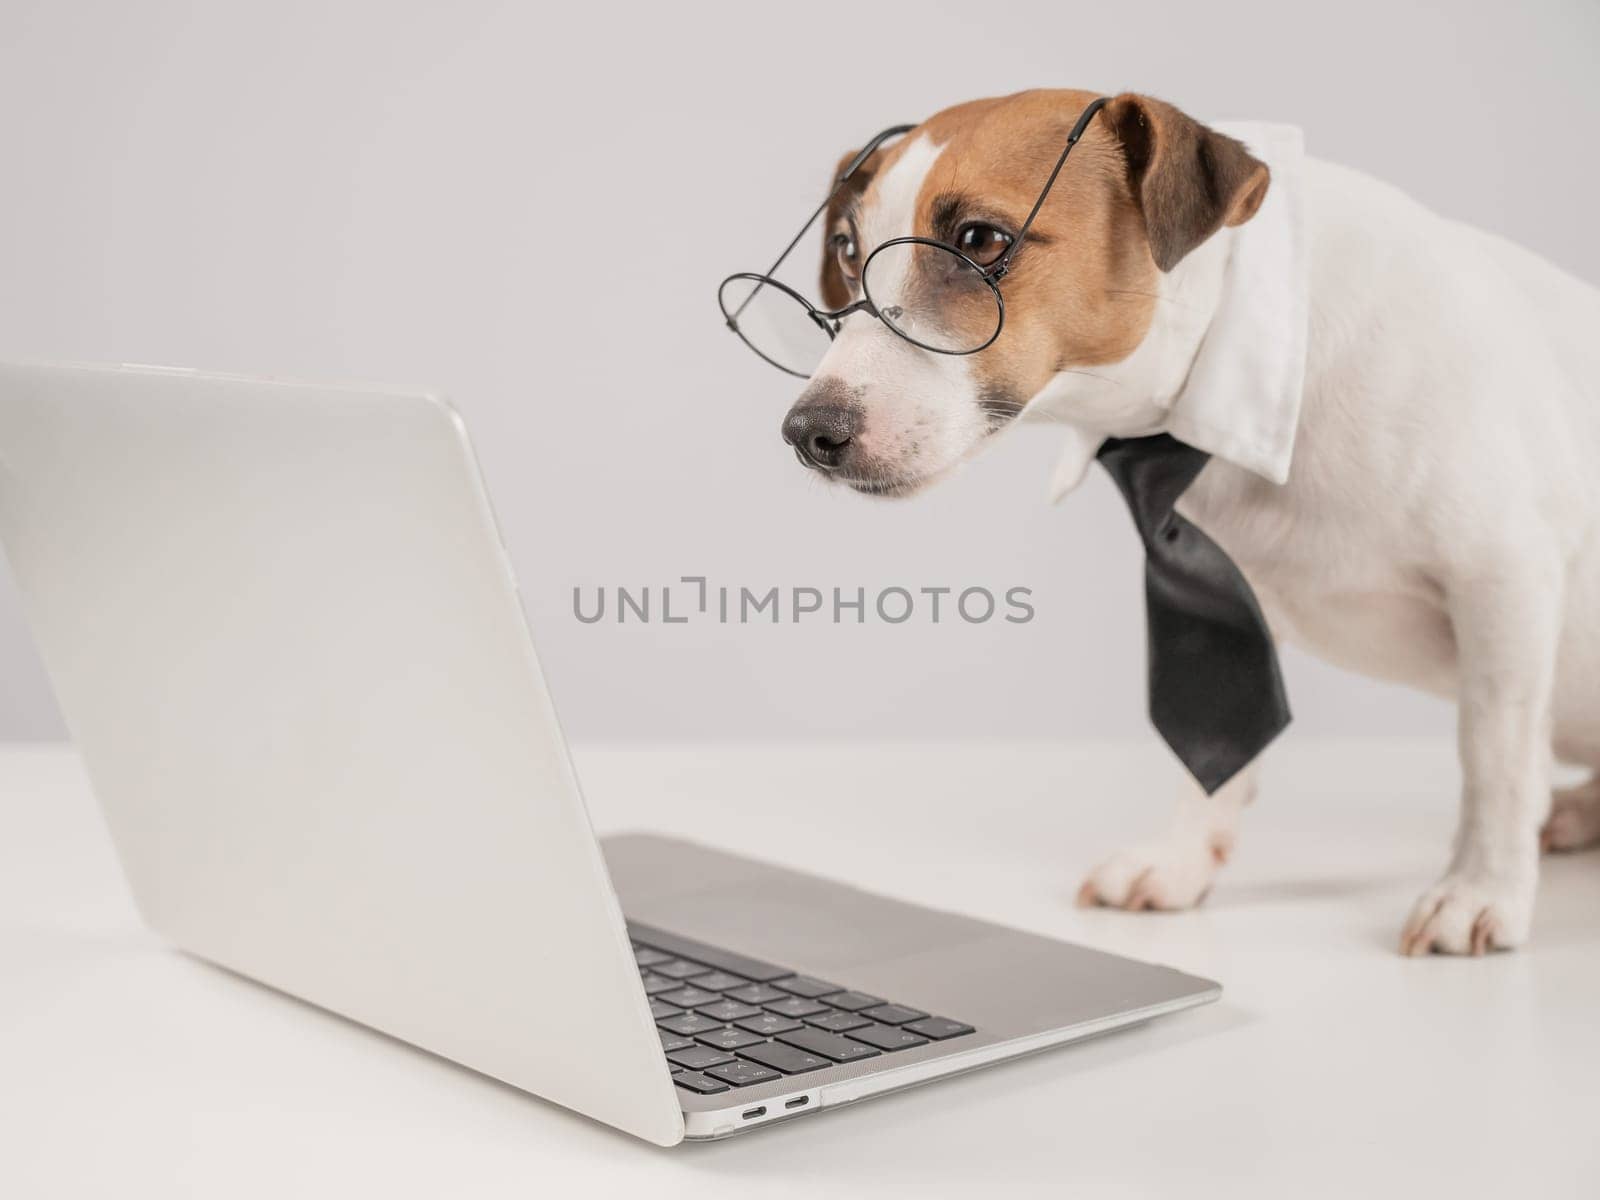 Cute Jack Russell Terrier dog wearing glasses and a tie sits at a laptop on a white background